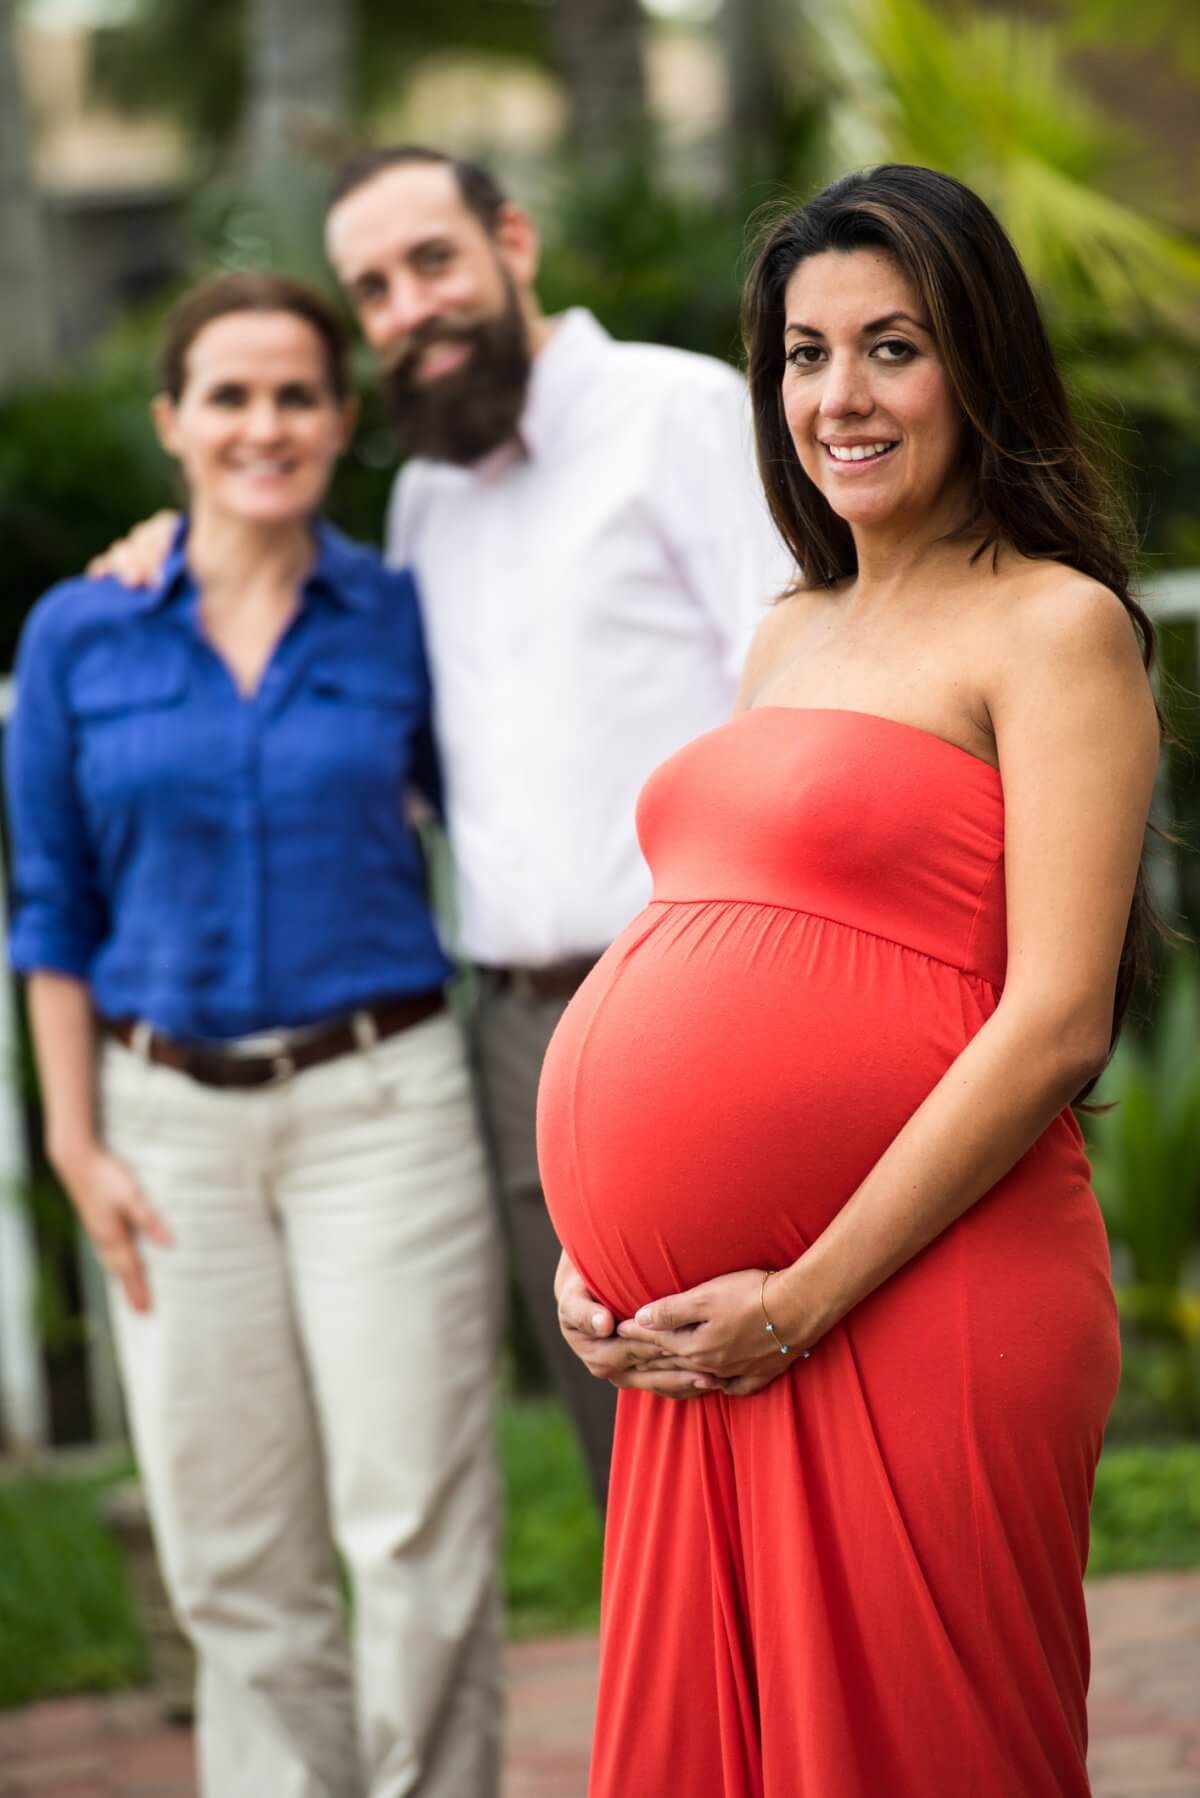 Do Surrogate Mothers Share DNA With The Baby?